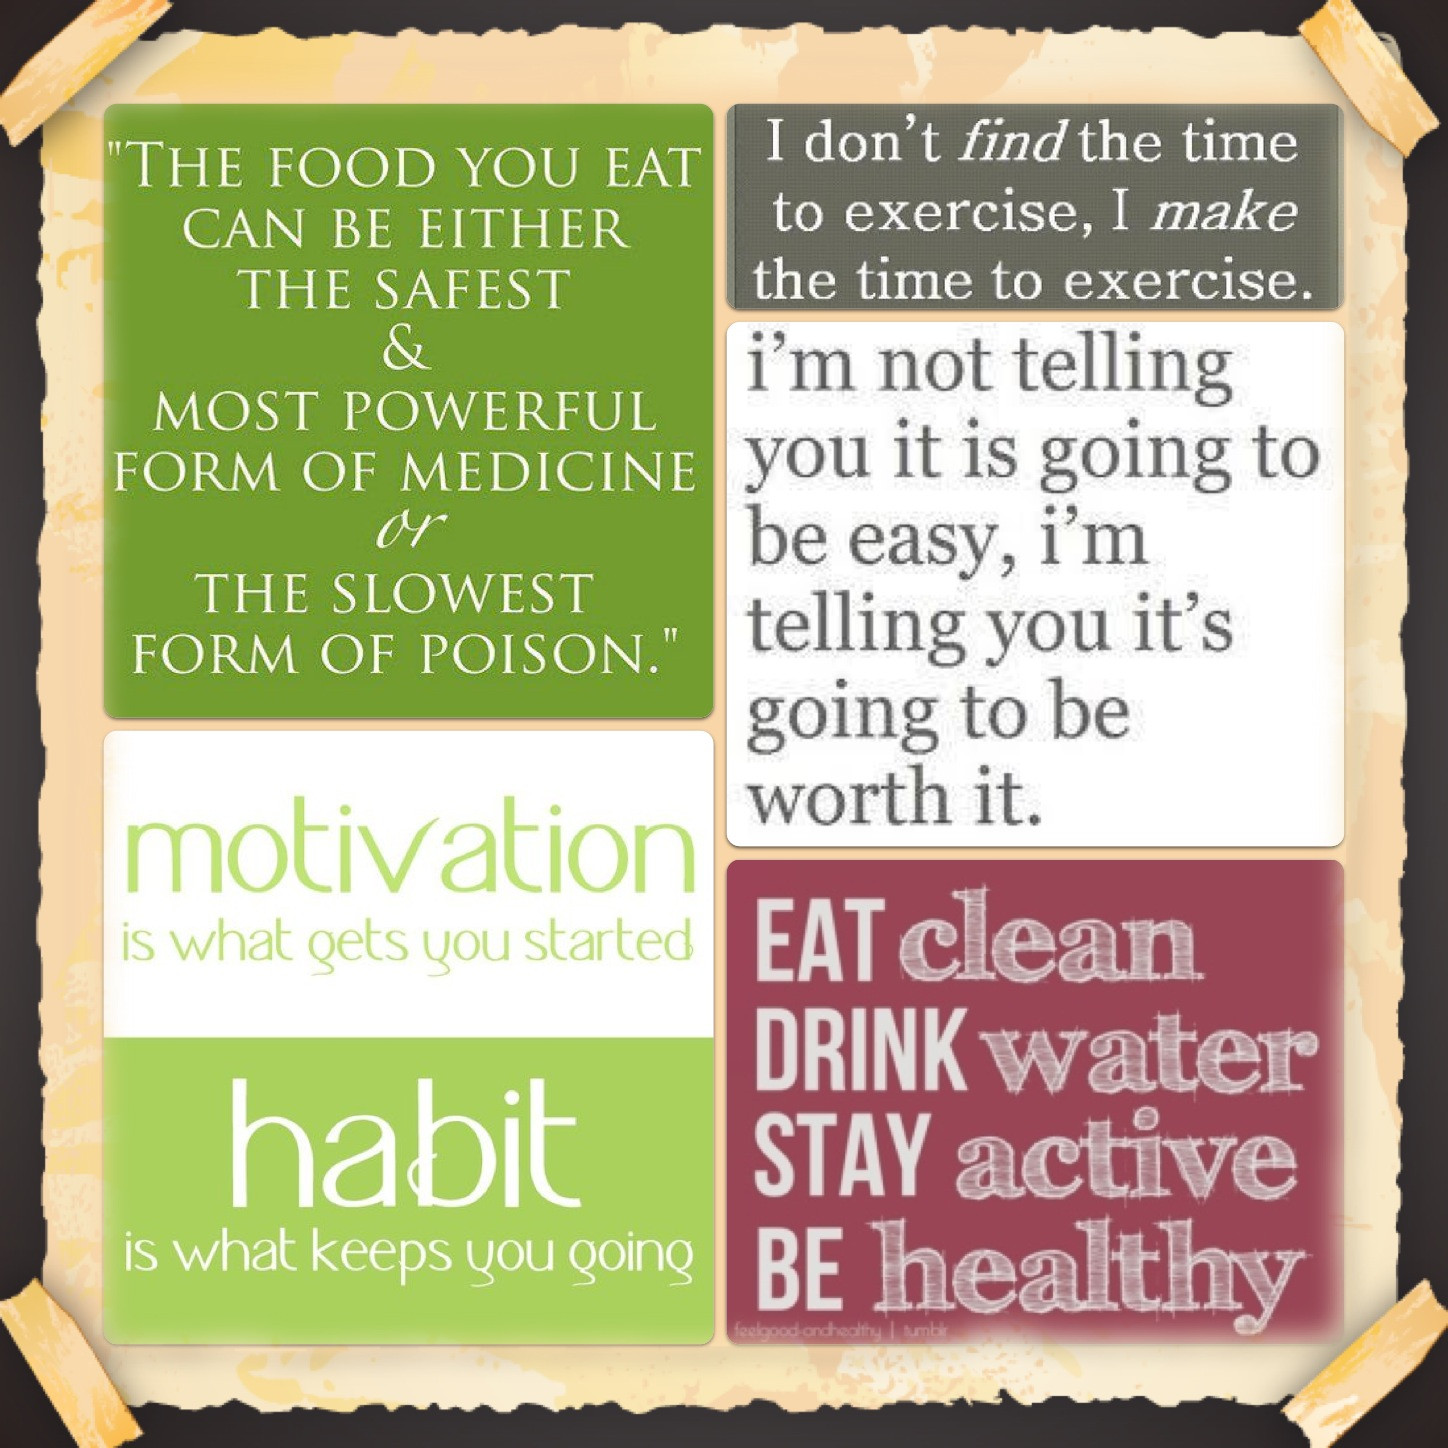 Motivational Health Quote
 Caro s Weight Loss Journey